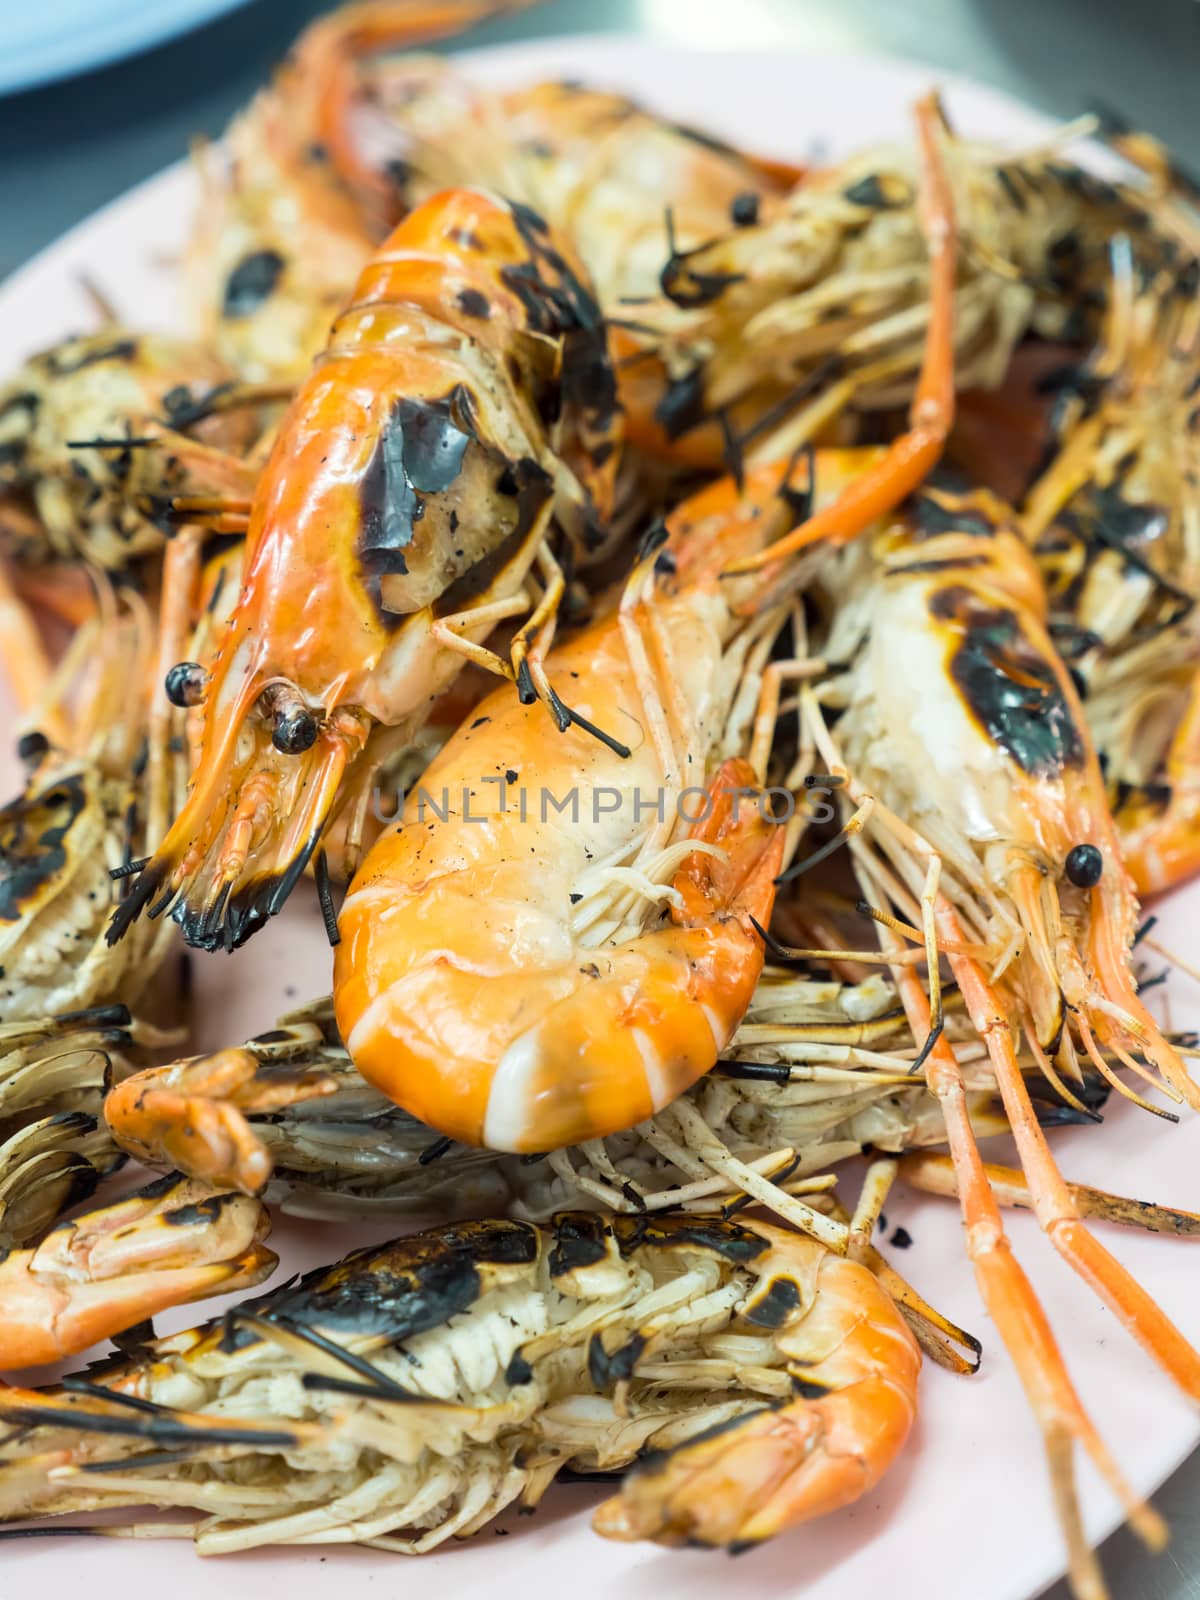 Grilled Prawns in the plate by ronnarong